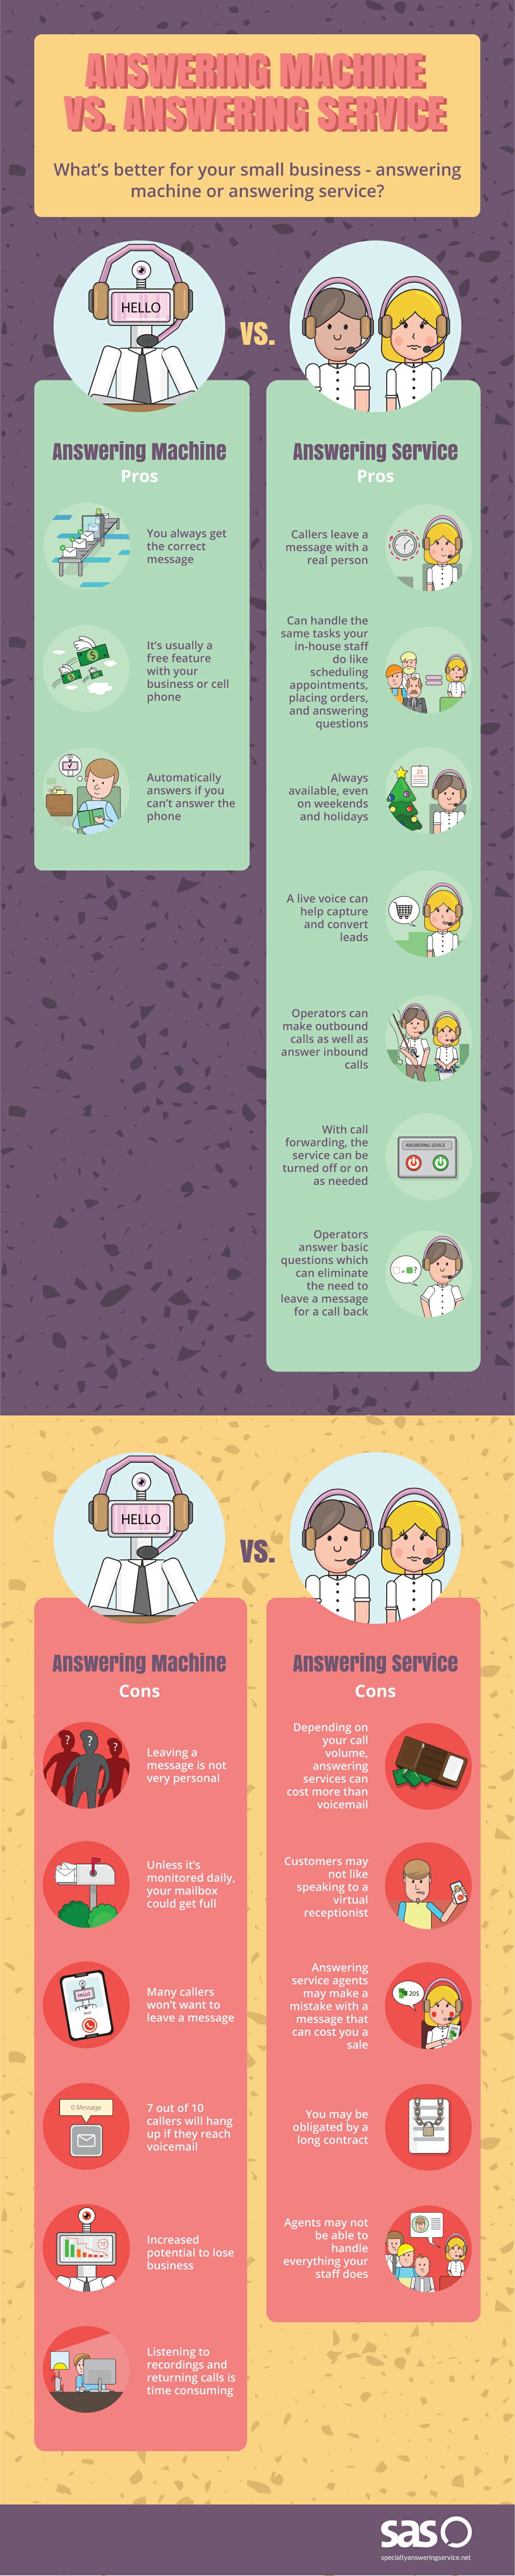 Answering Machine vs Answering Service Infographic